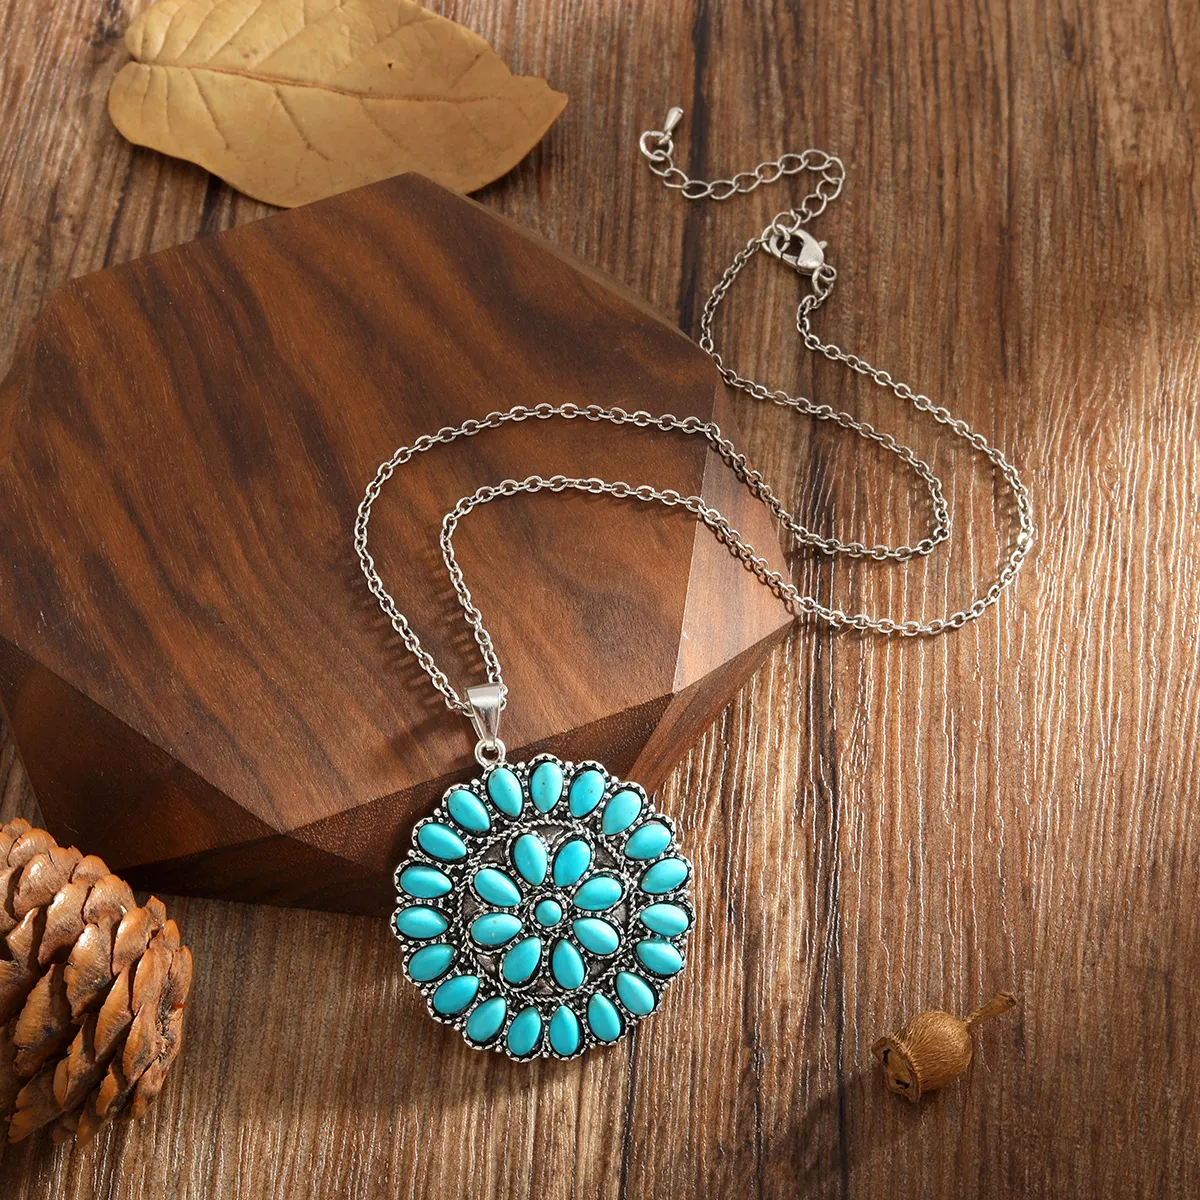 Fashion Jewelry boho design naja turquoise jewelry round pendant vintage necklace for women ladies gifts